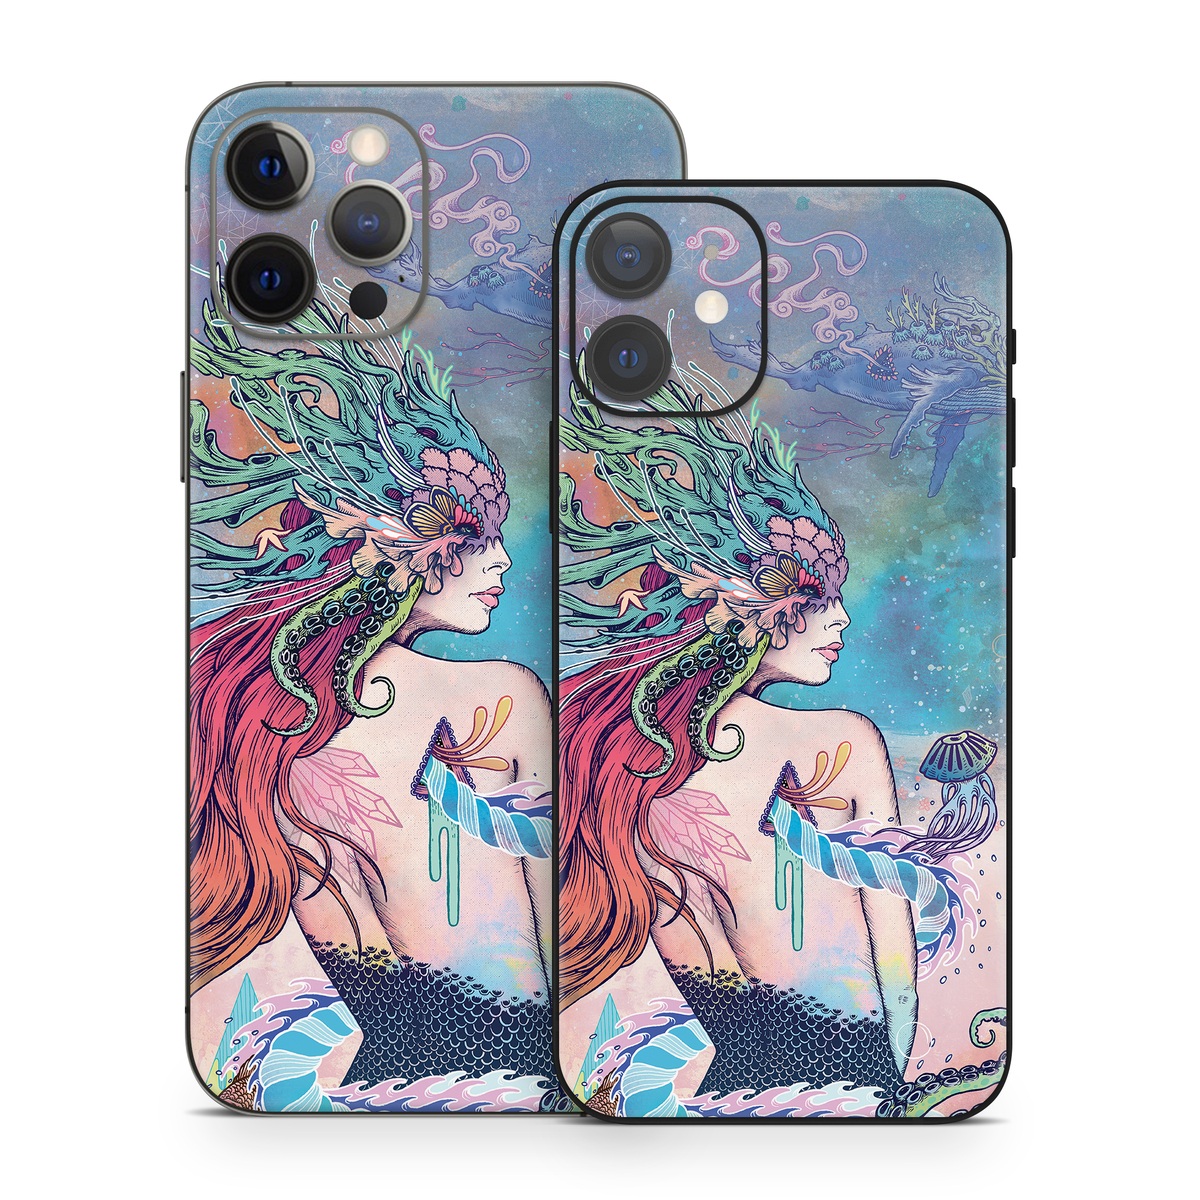 iPhone 12 Skin design of Illustration, Fictional character, Art, Cg artwork, Fiction, Mythology, Painting, Mermaid, with blue, purple, green, red, yellow, pink colors